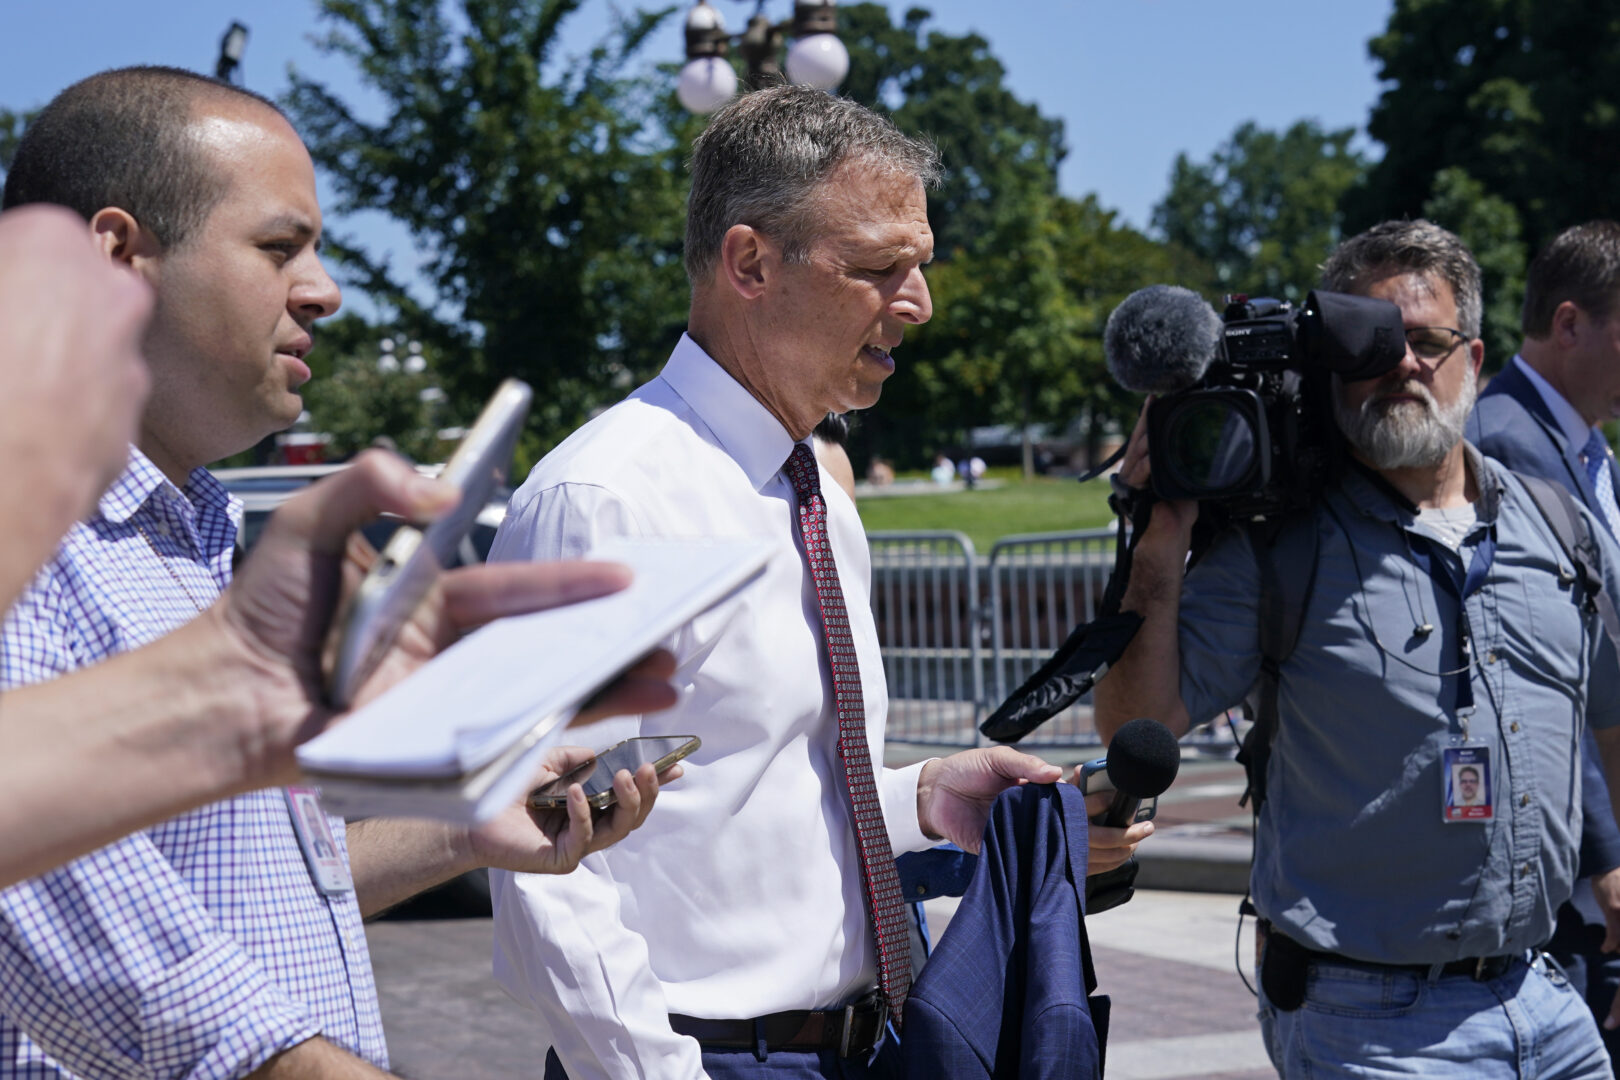 Rep. Scott Perry, R-Pa., is followed by reporters on Capitol Hill in Washington, Friday, Aug. 12, 2022. (AP Photo/Susan Walsh)